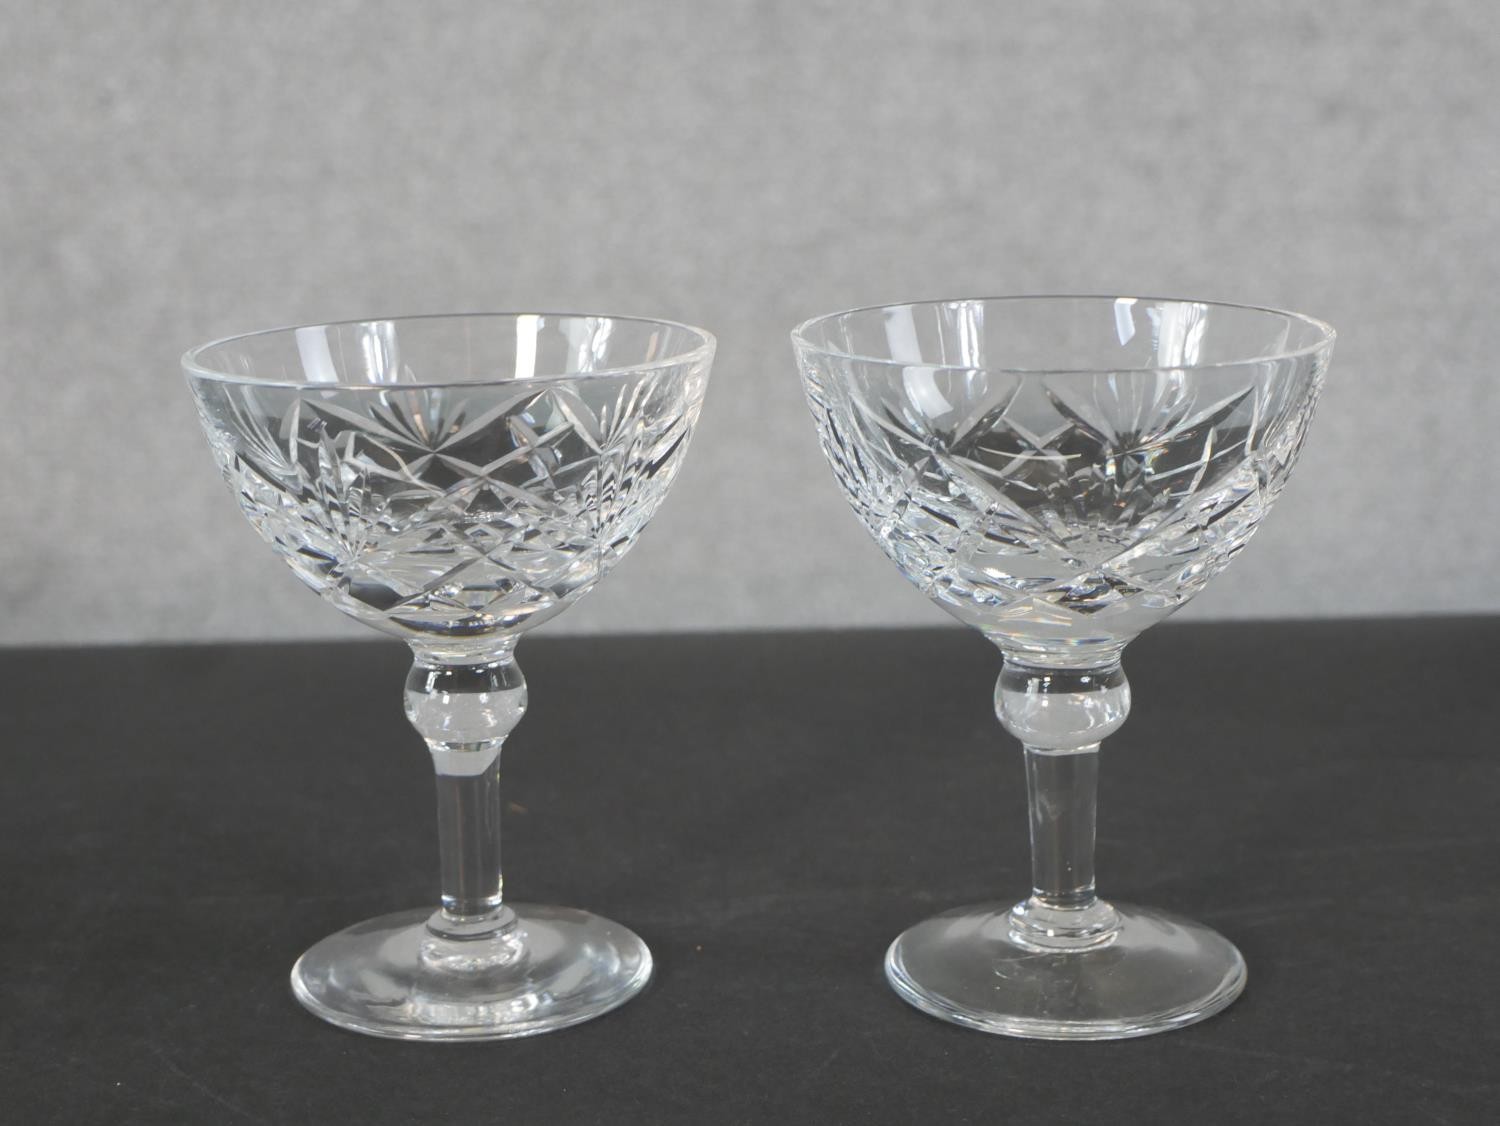 A collection of cut glass and crystal, including a set of five Webb Crystal dessert sets (bowl, - Image 8 of 11